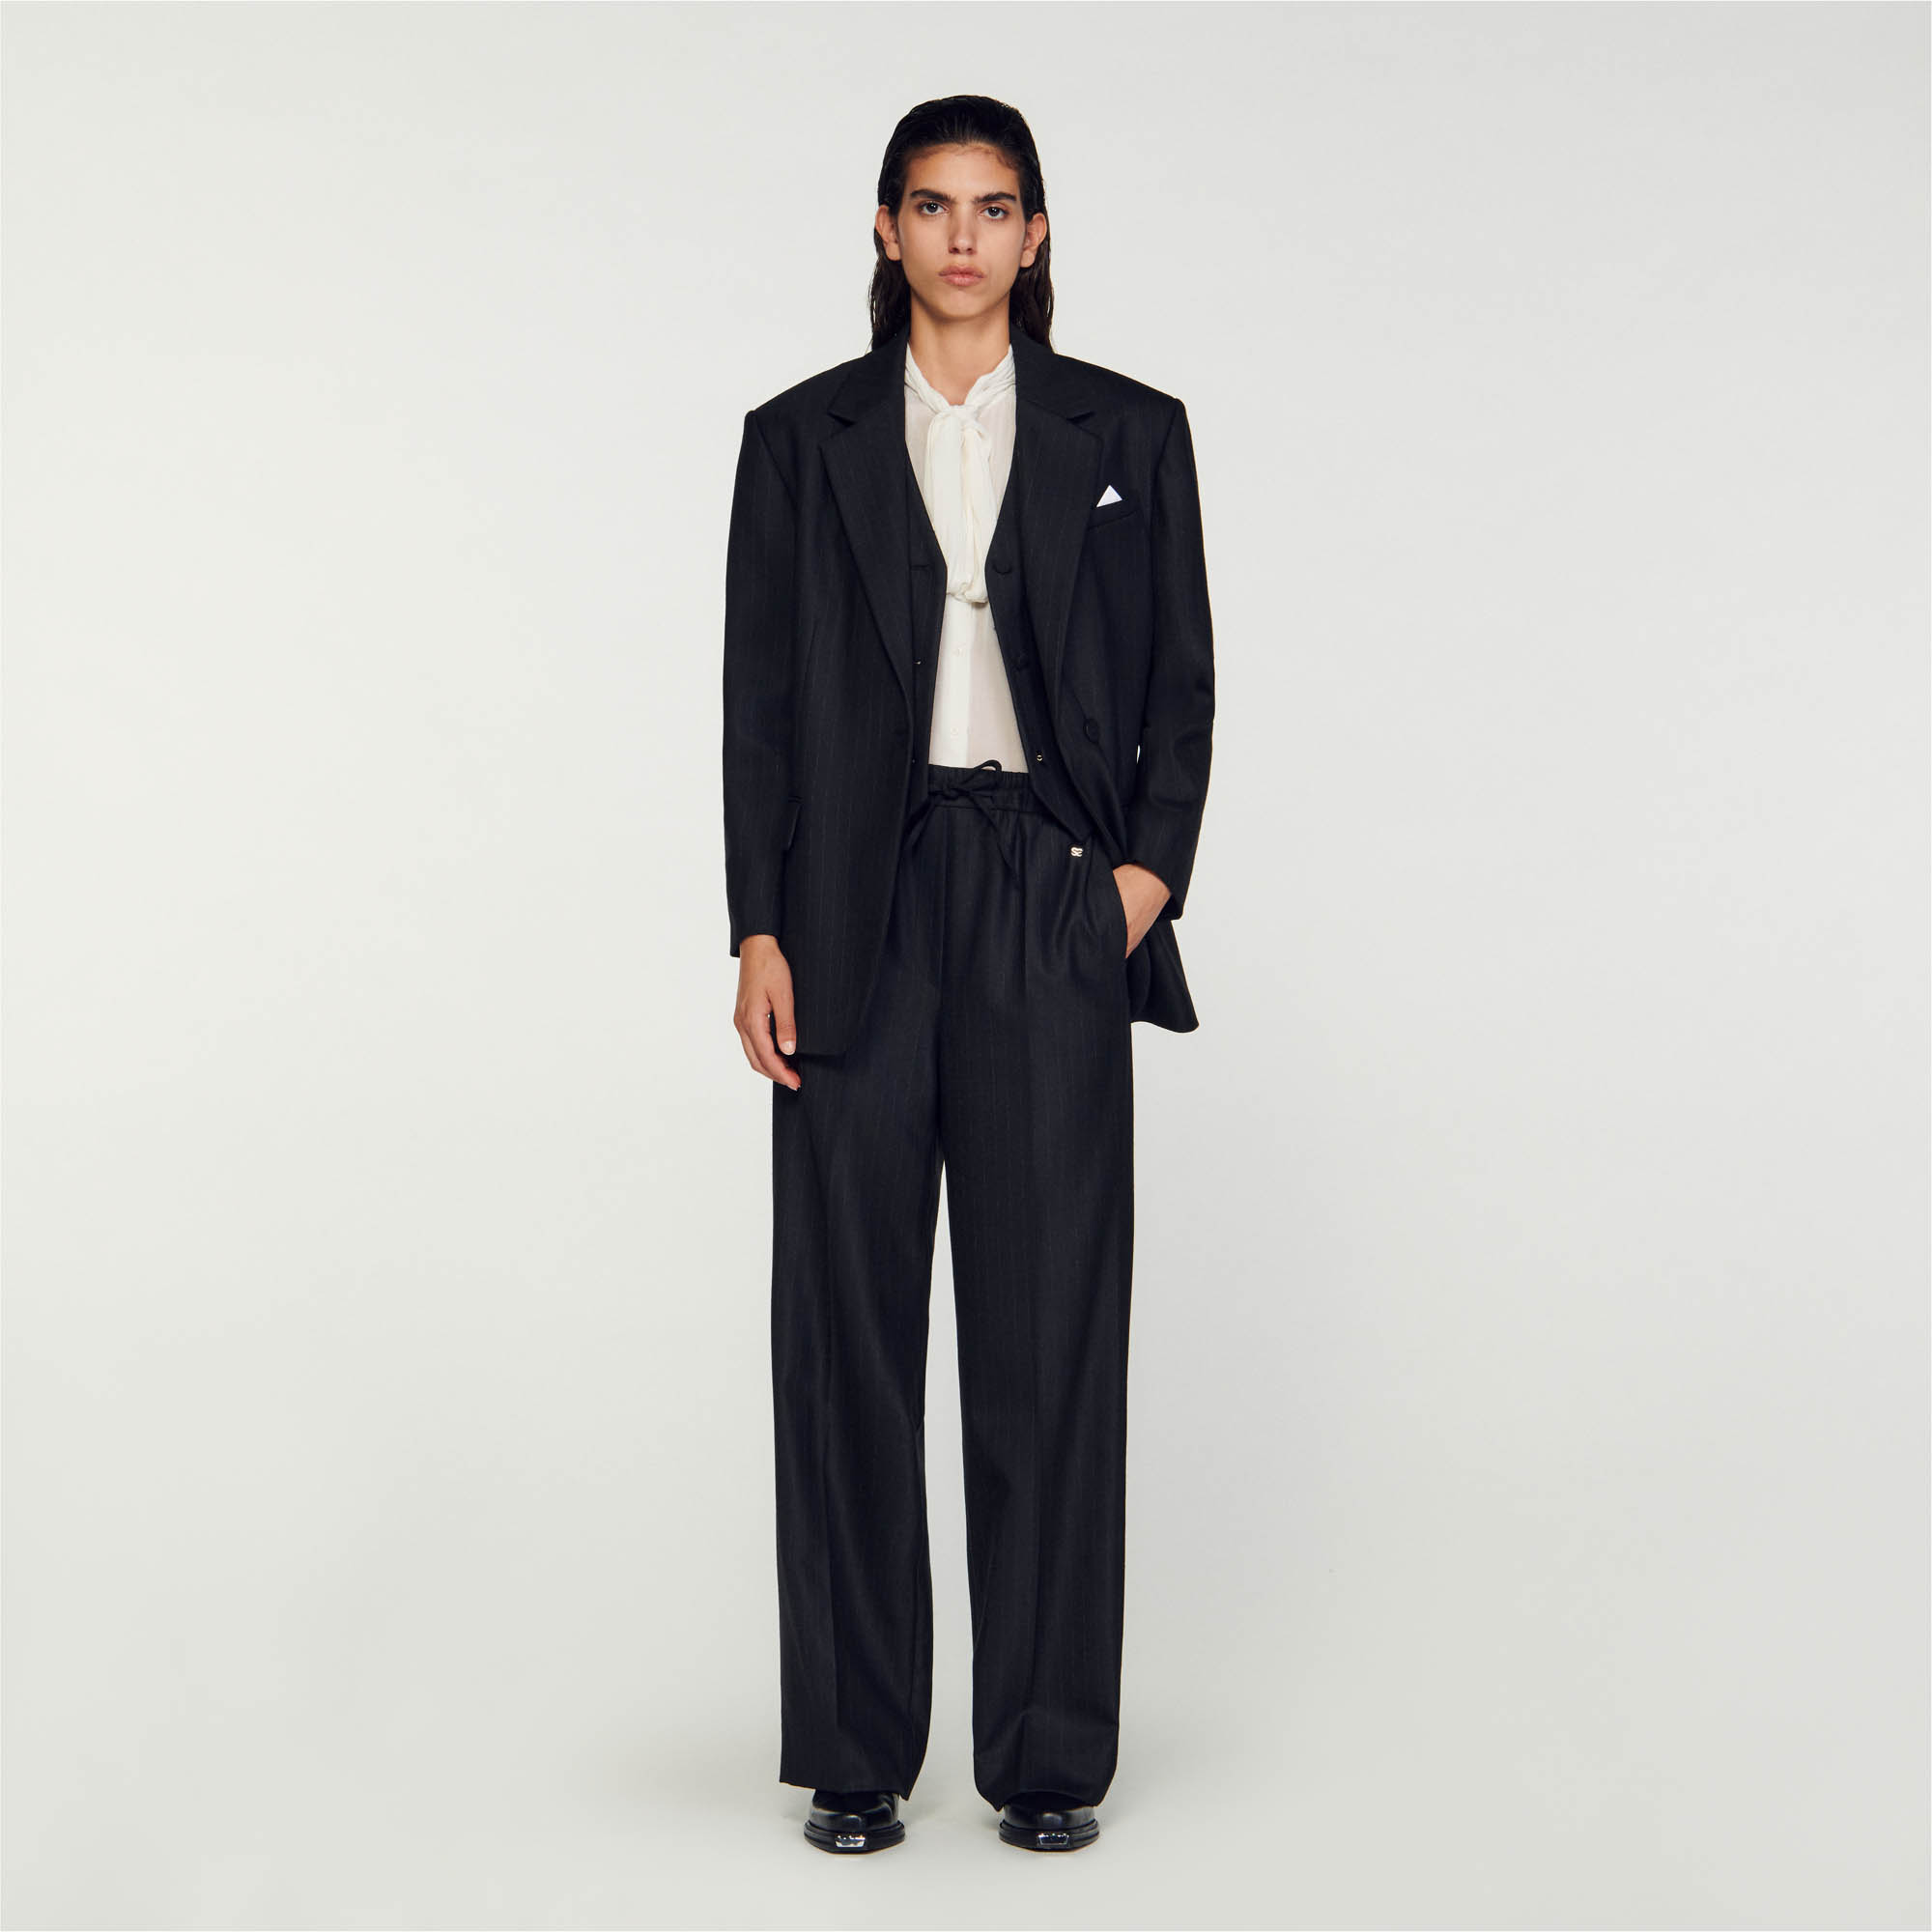 Sandro polyester Oversized straight-leg pants with thin stripes, with elasticated waistband and drawstring and side pockets